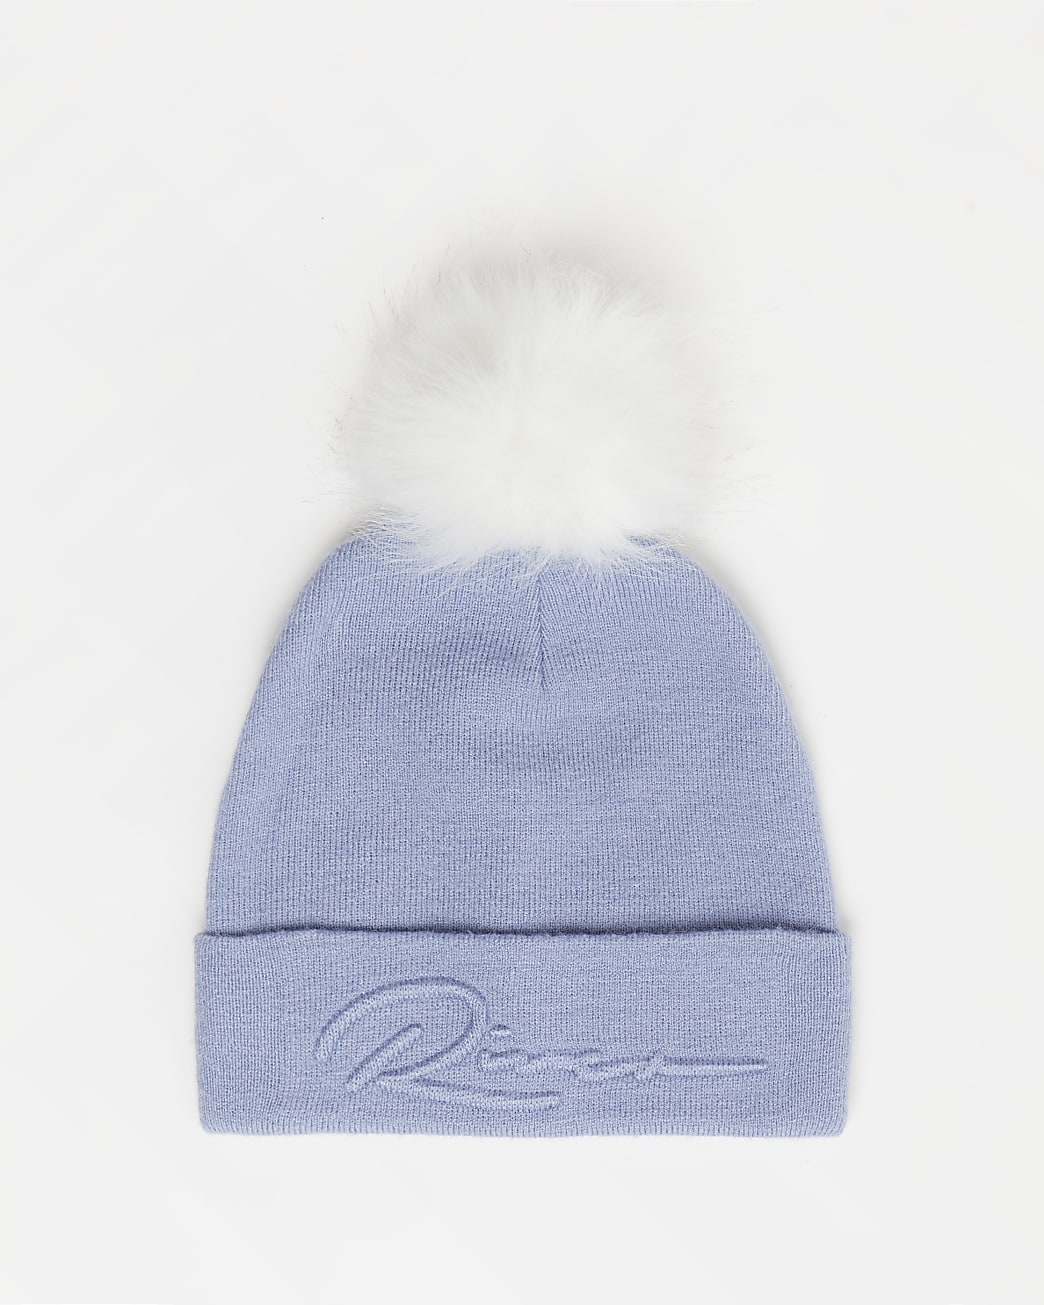 Blue River embossed beanie hat